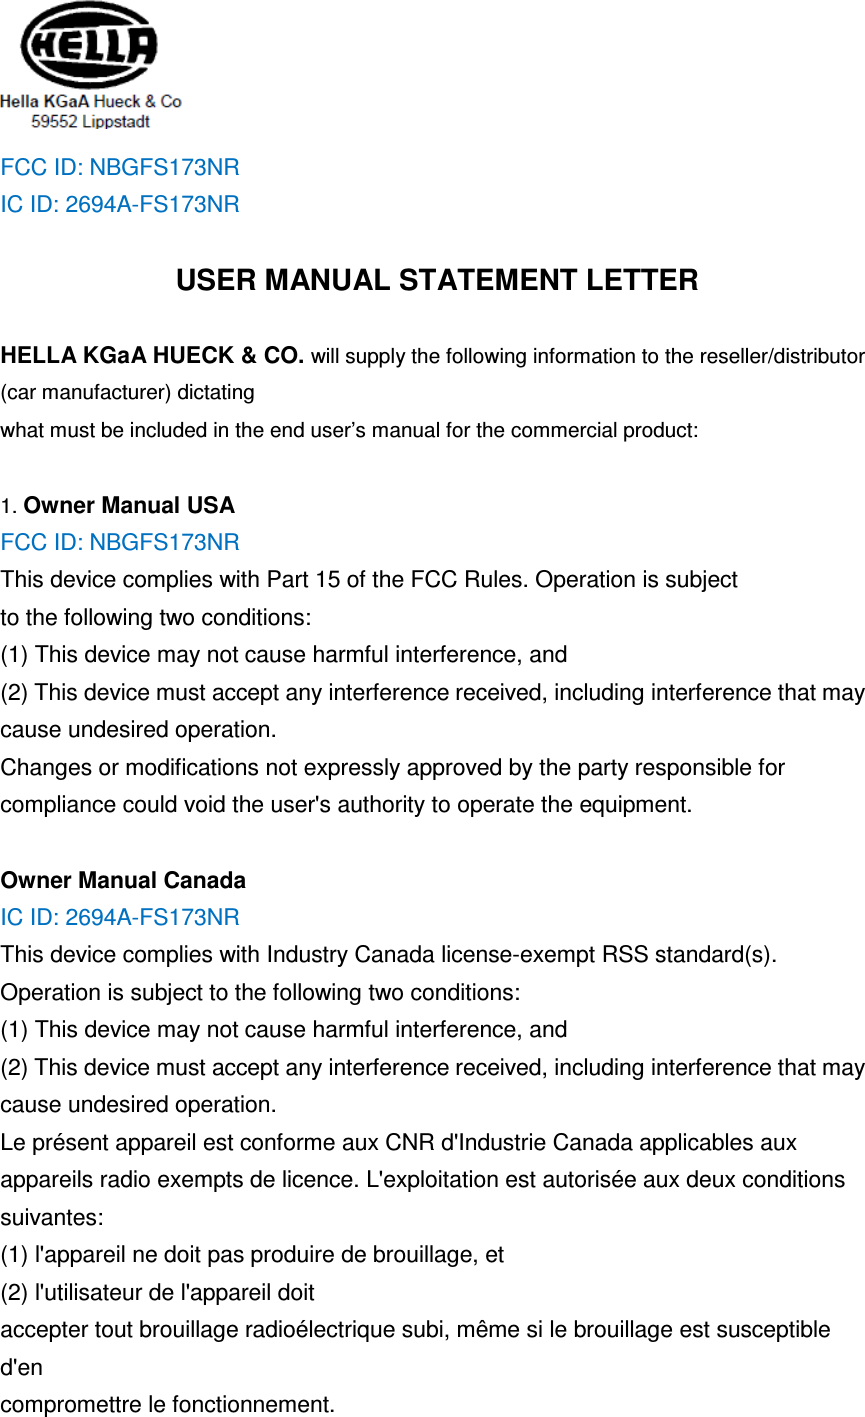  FCC ID: NBGFS173NR IC ID: 2694A-FS173NR  USER MANUAL STATEMENT LETTER  HELLA KGaA HUECK &amp; CO. will supply the following information to the reseller/distributor (car manufacturer) dictating what must be included in the end user’s manual for the commercial product:  1. Owner Manual USA FCC ID: NBGFS173NR This device complies with Part 15 of the FCC Rules. Operation is subject to the following two conditions: (1) This device may not cause harmful interference, and   (2) This device must accept any interference received, including interference that may cause undesired operation. Changes or modifications not expressly approved by the party responsible for compliance could void the user&apos;s authority to operate the equipment.  Owner Manual Canada IC ID: 2694A-FS173NR This device complies with Industry Canada license-exempt RSS standard(s). Operation is subject to the following two conditions: (1) This device may not cause harmful interference, and   (2) This device must accept any interference received, including interference that may cause undesired operation. Le présent appareil est conforme aux CNR d&apos;Industrie Canada applicables aux appareils radio exempts de licence. L&apos;exploitation est autorisée aux deux conditions suivantes: (1) l&apos;appareil ne doit pas produire de brouillage, et   (2) l&apos;utilisateur de l&apos;appareil doit accepter tout brouillage radioélectrique subi, même si le brouillage est susceptible d&apos;en compromettre le fonctionnement. 